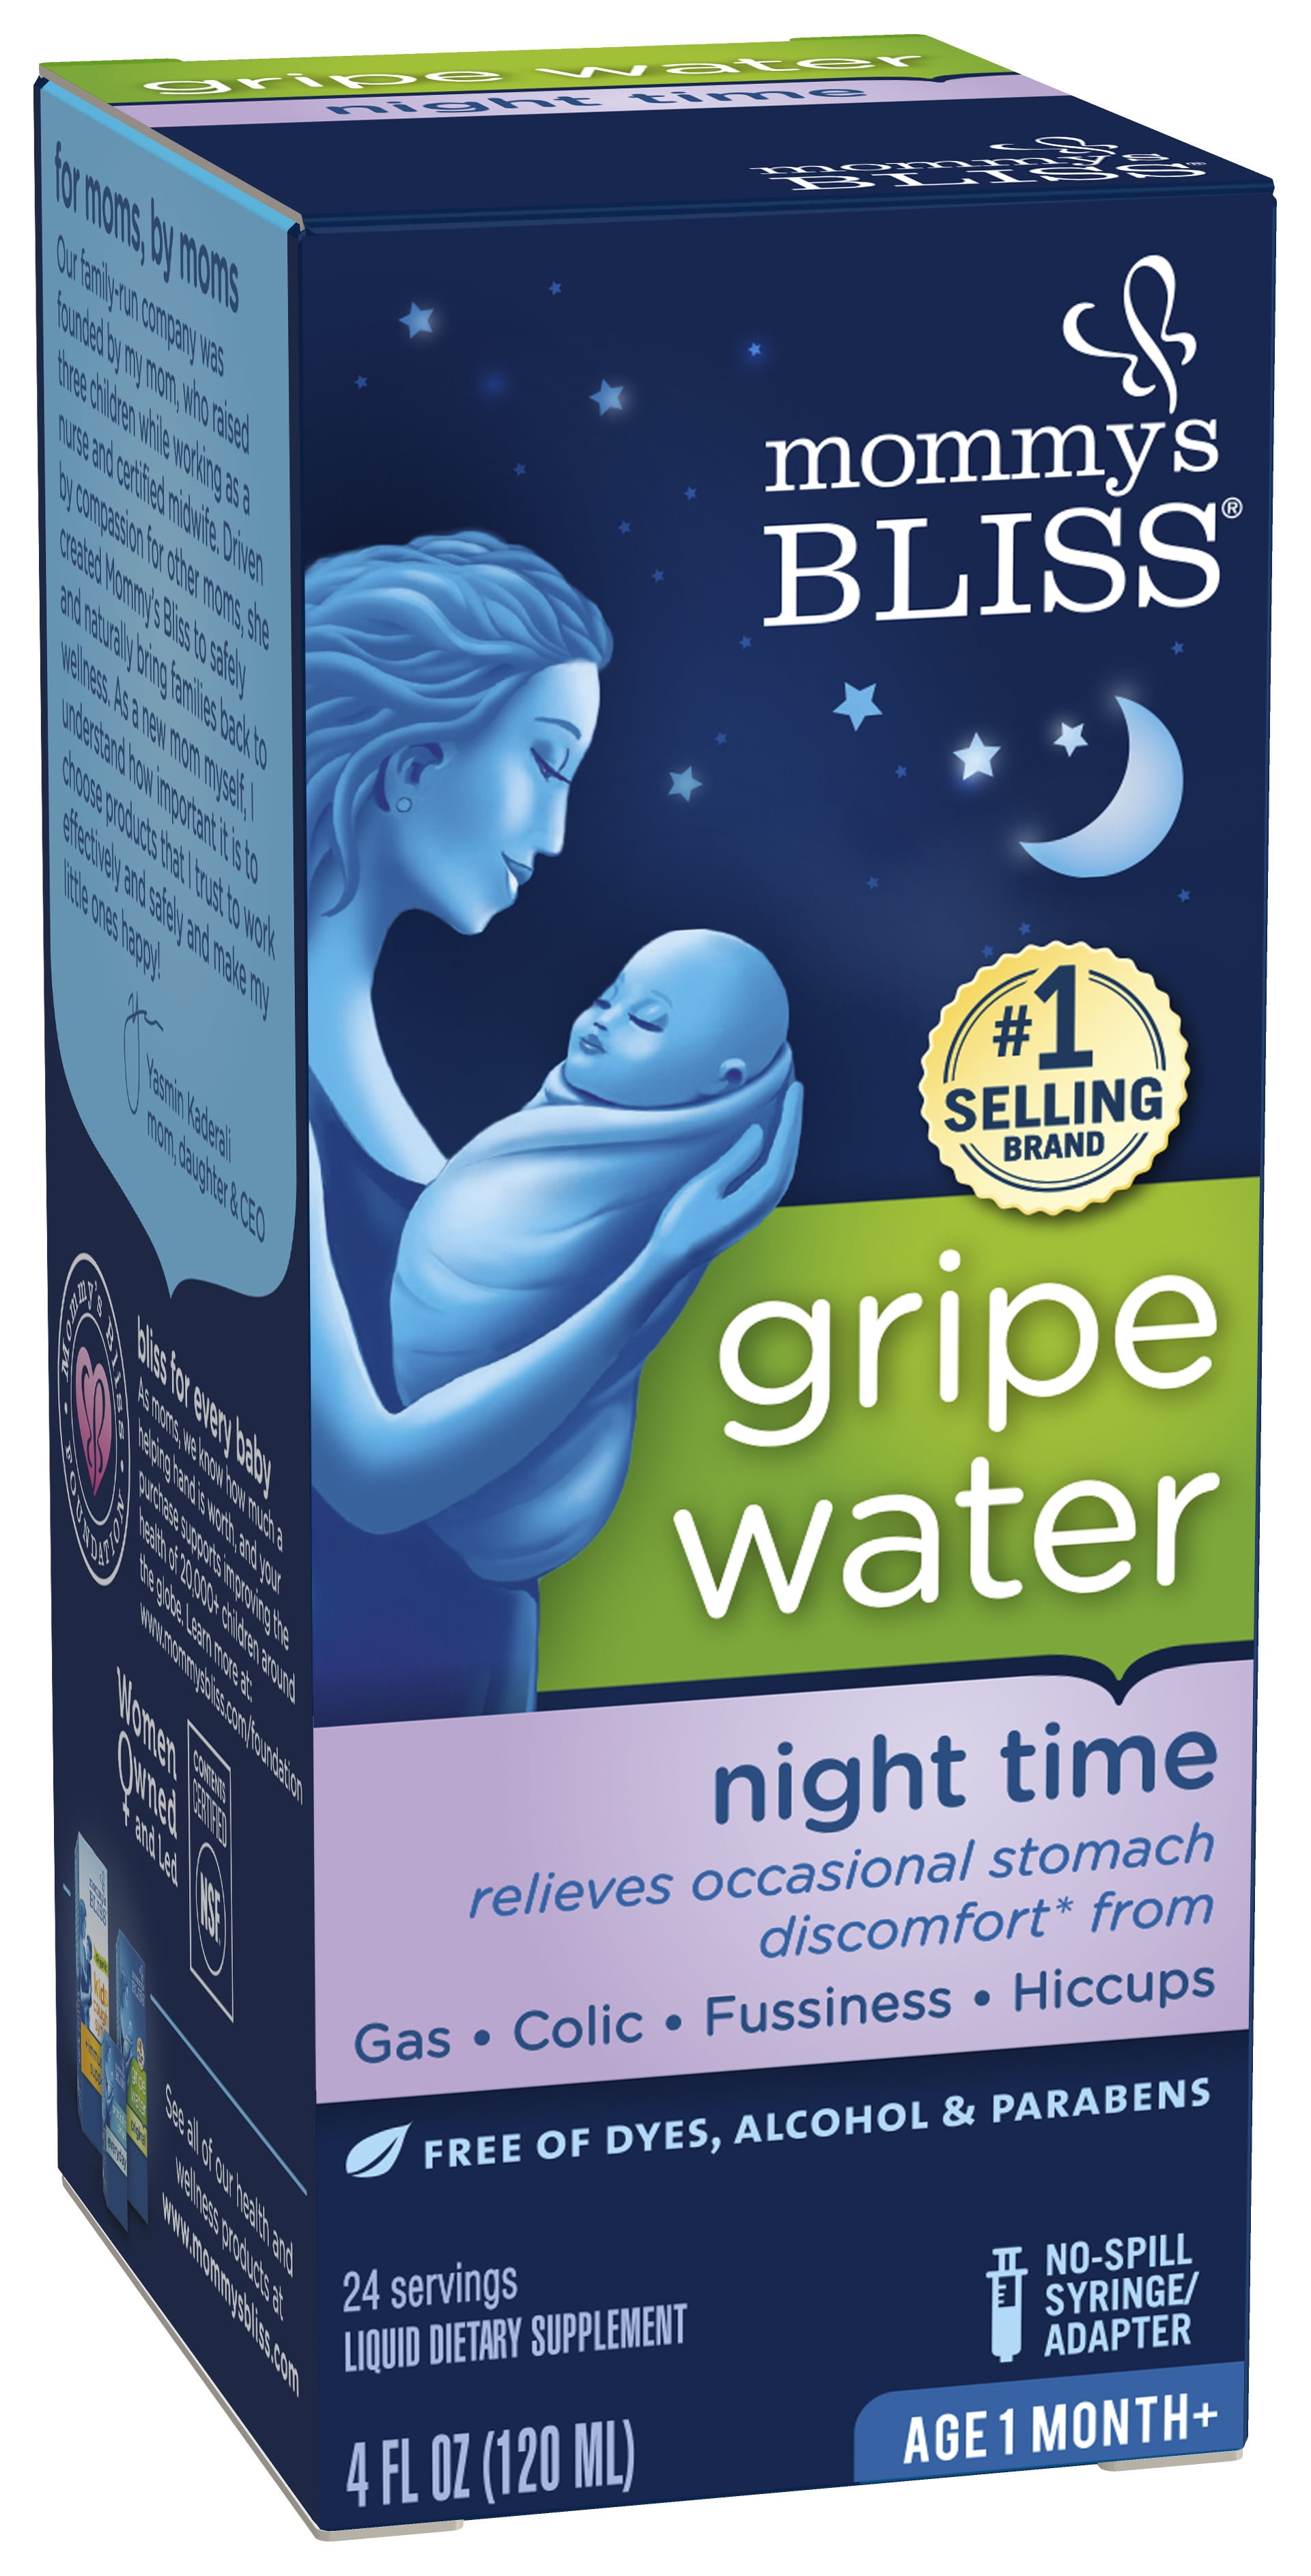 Mommy's Bliss Gripe Water Night Time, Infant Gas & Colic Relief, Gentle &  Safe, 4 Weeks+, 4 FL OZ Bottle (Pack of 1)